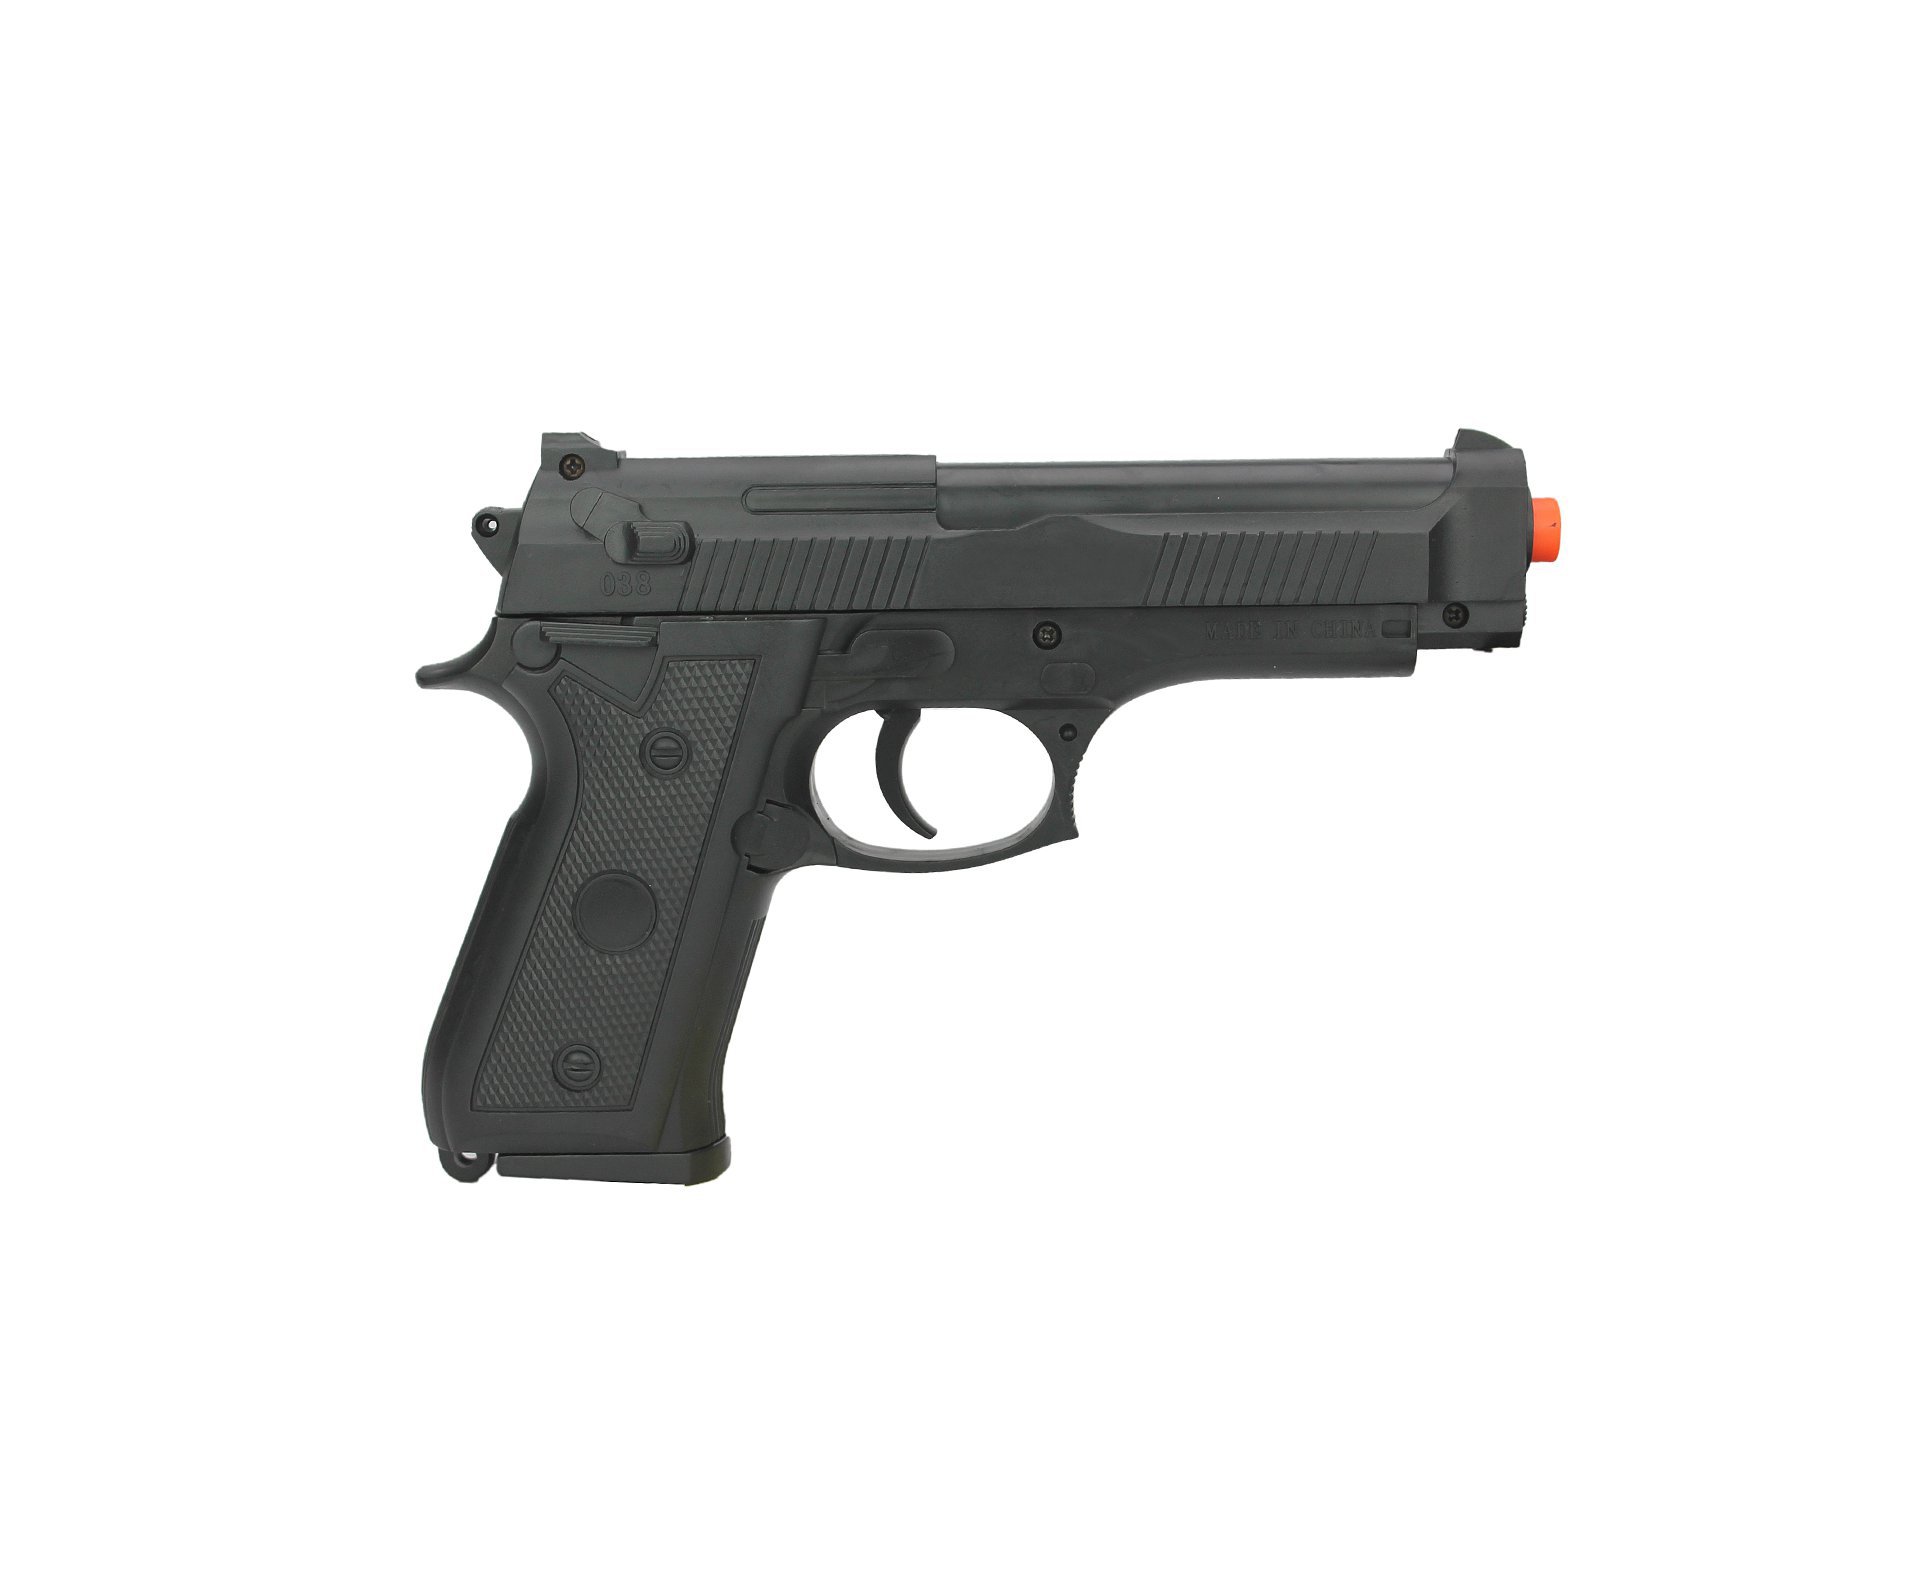 Pistola Airsoft  Wg-cyma No38 Spring Toy Abs 6mm